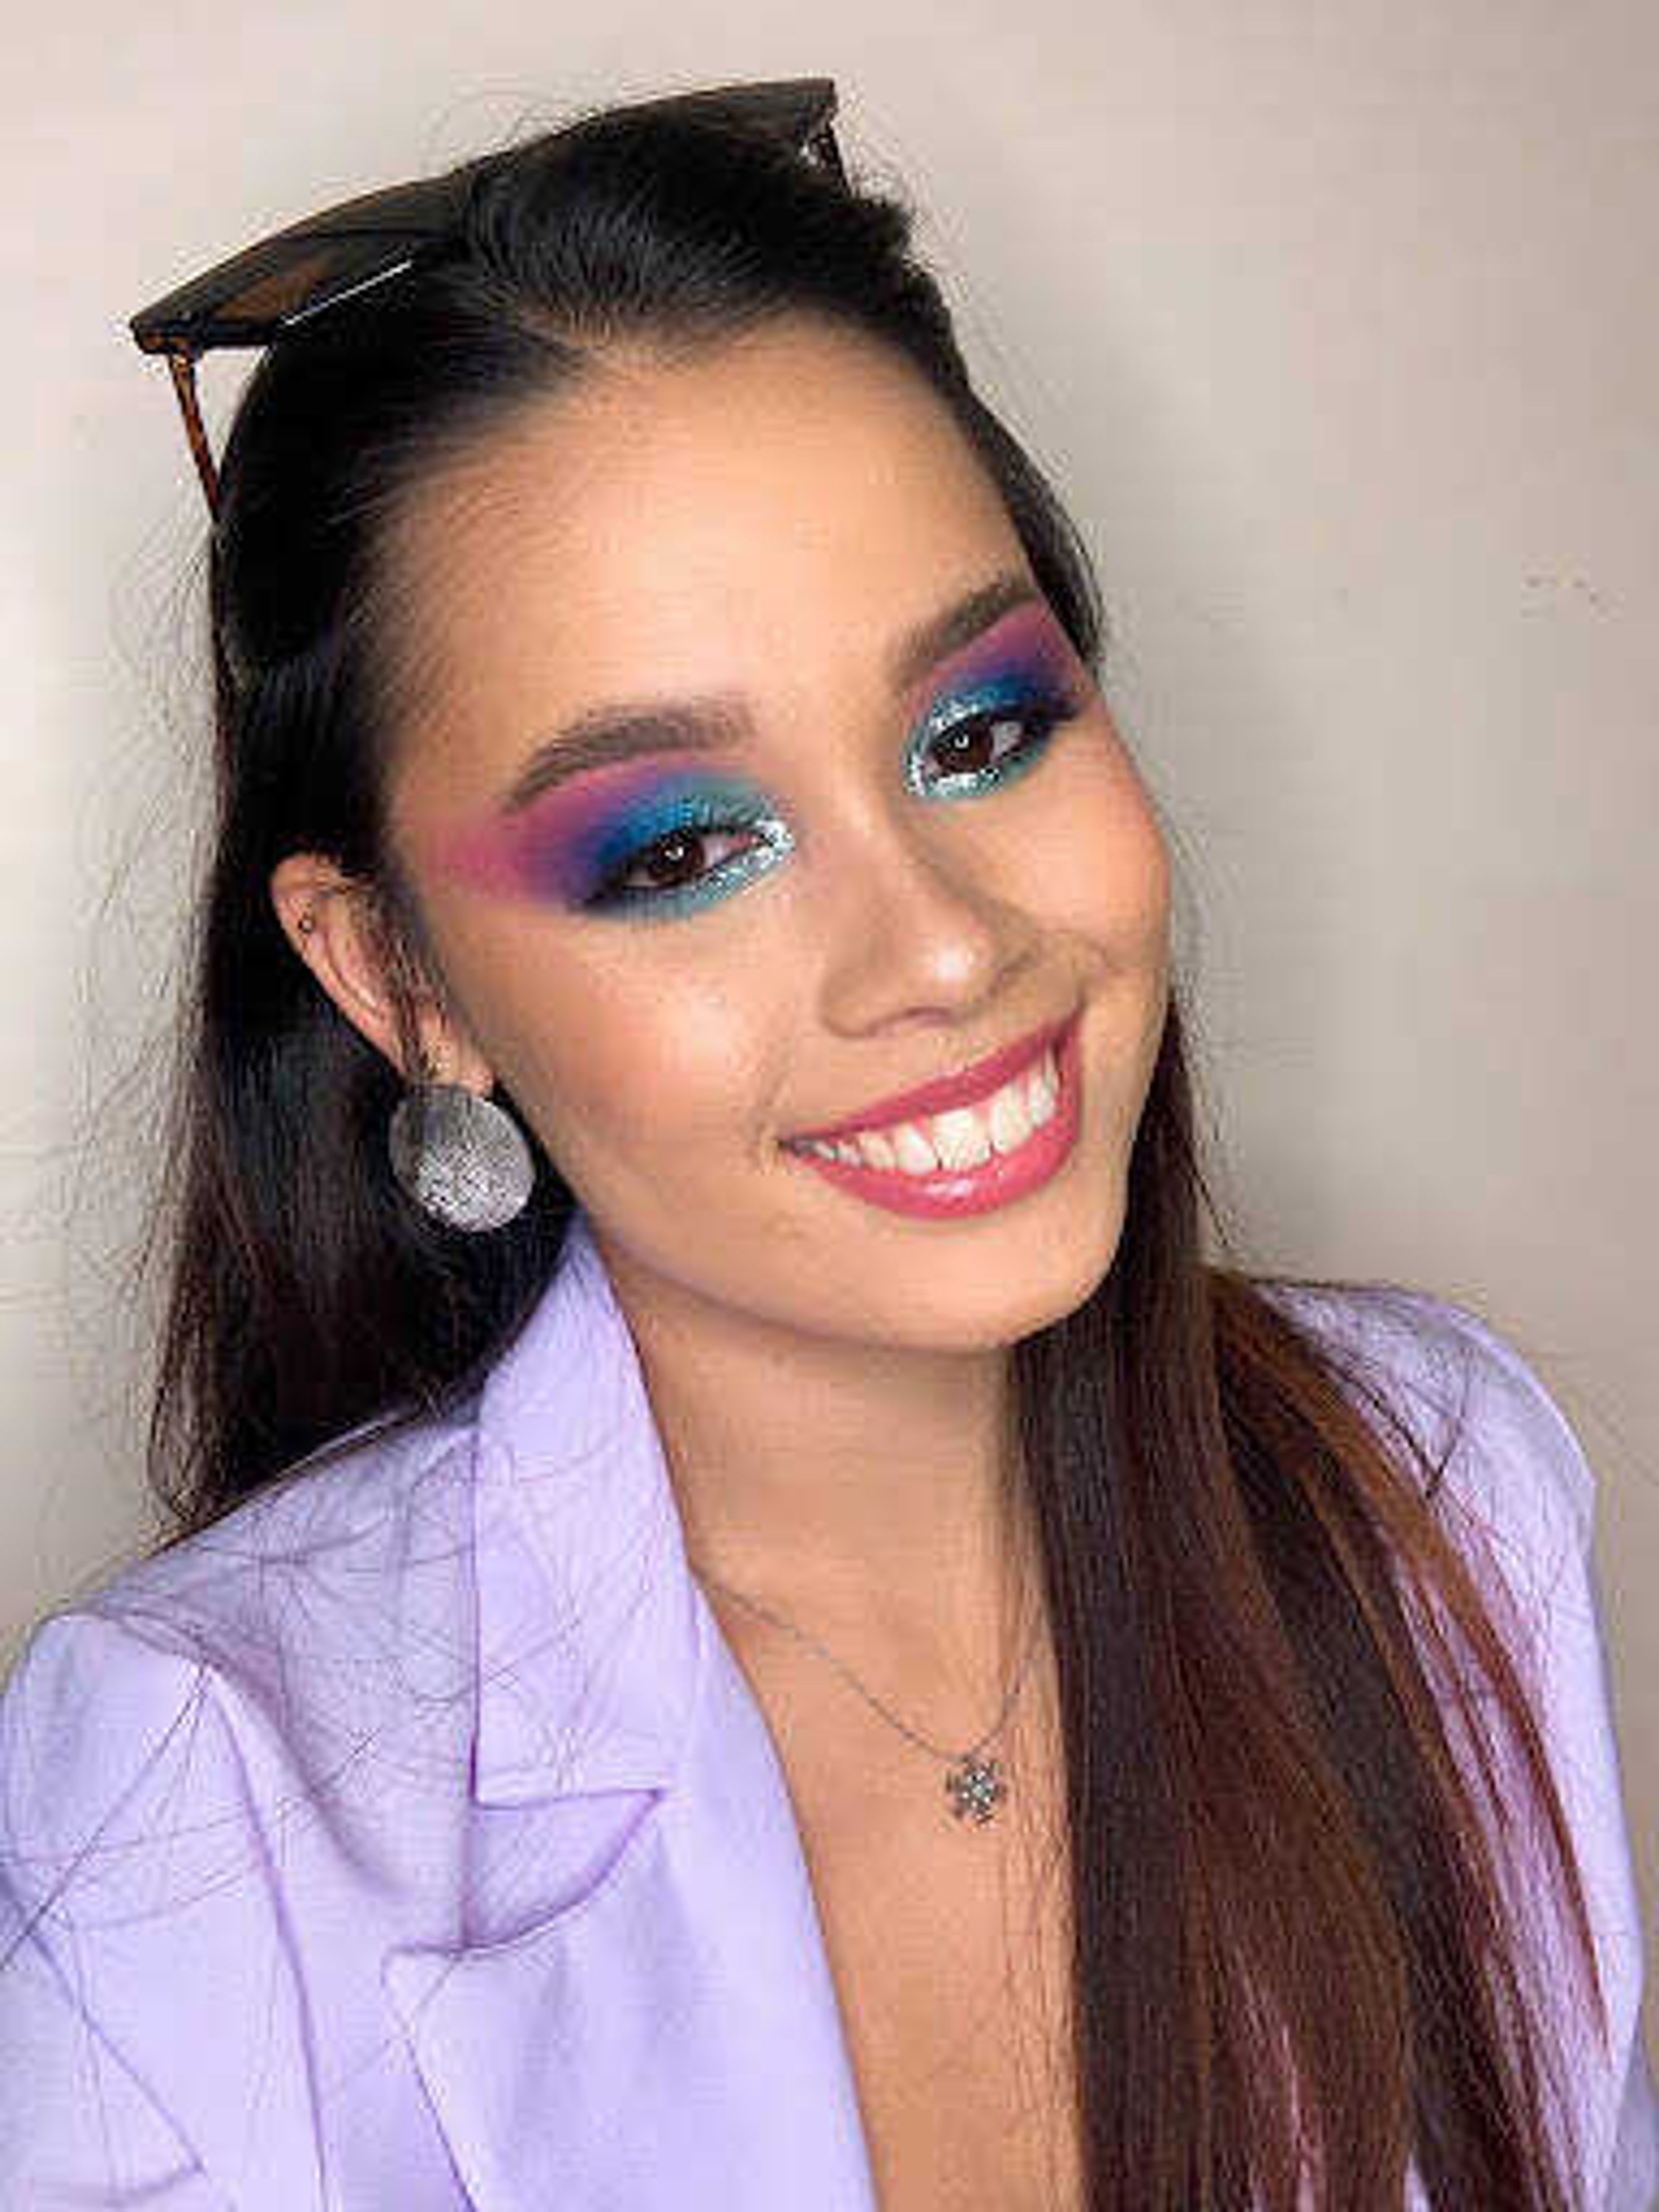 SEMO international student shares journey in love for makeup